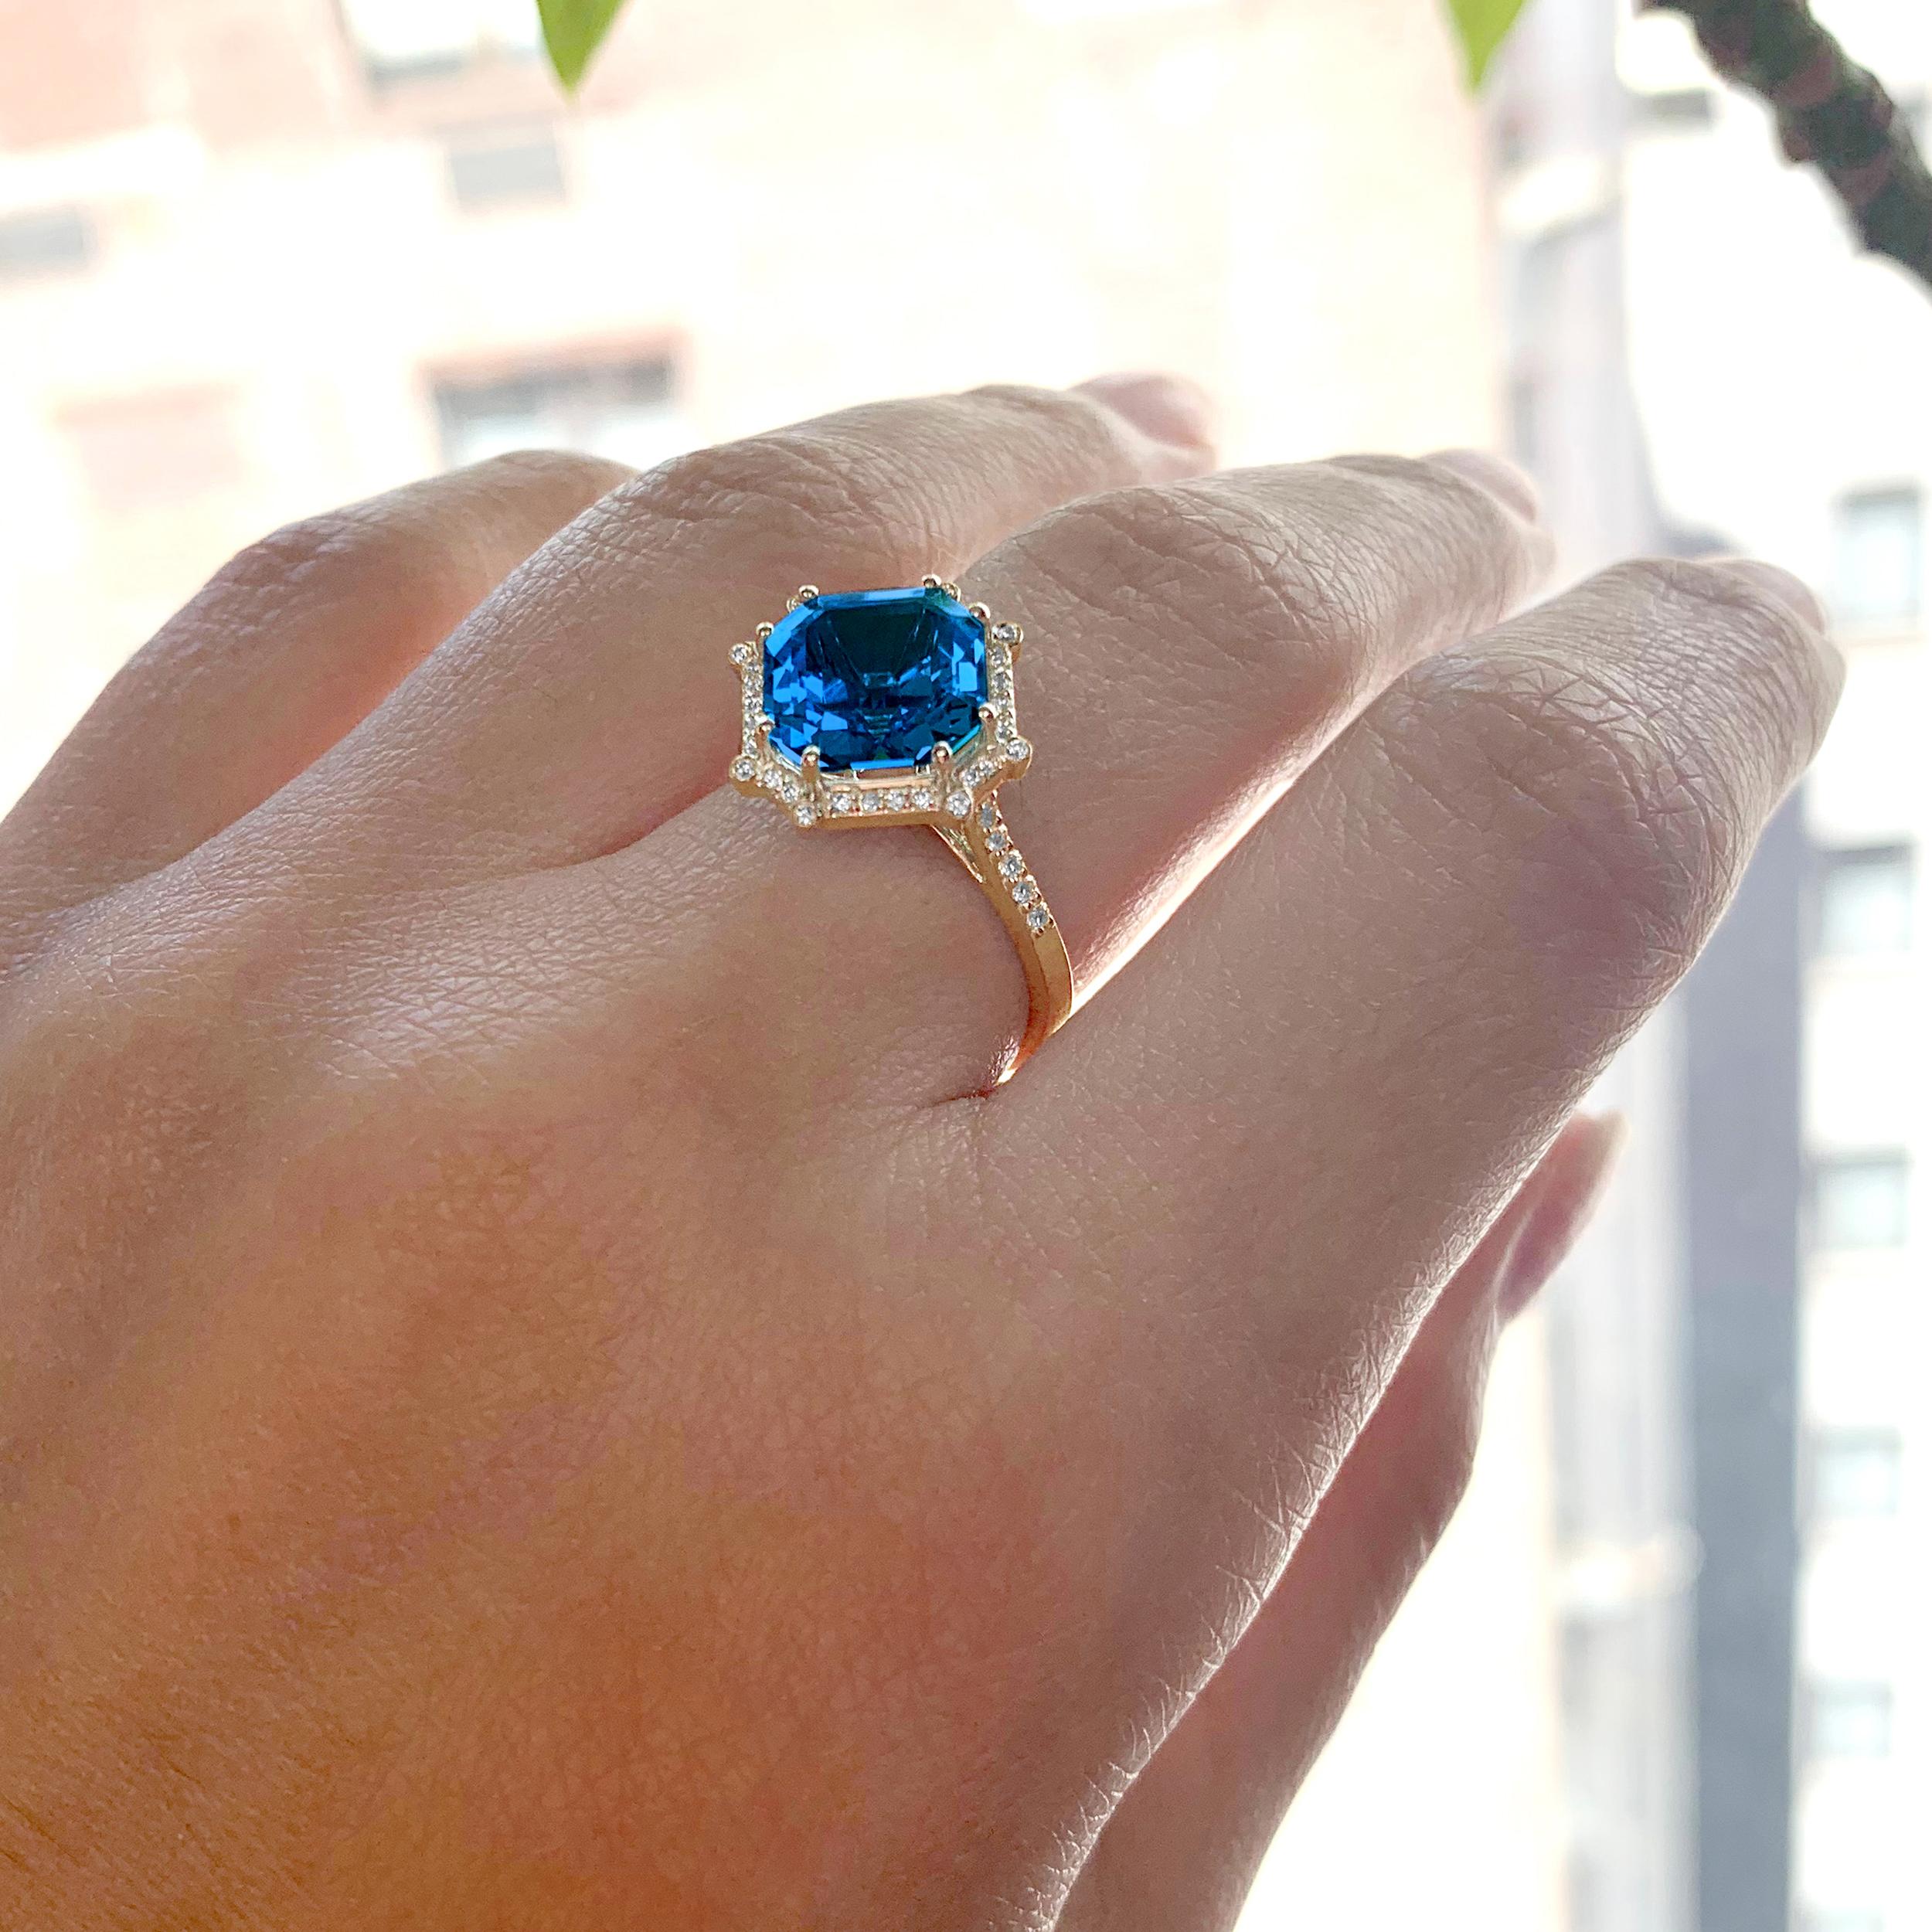 London Blue Topaz Octagon Ring in 18K Yellow Gold with Diamonds from 'Gossip' Collection

Stone Size: 9 x 9 mm

Diamonds: G-H / VS, Approx Wt: 0.20 Cts